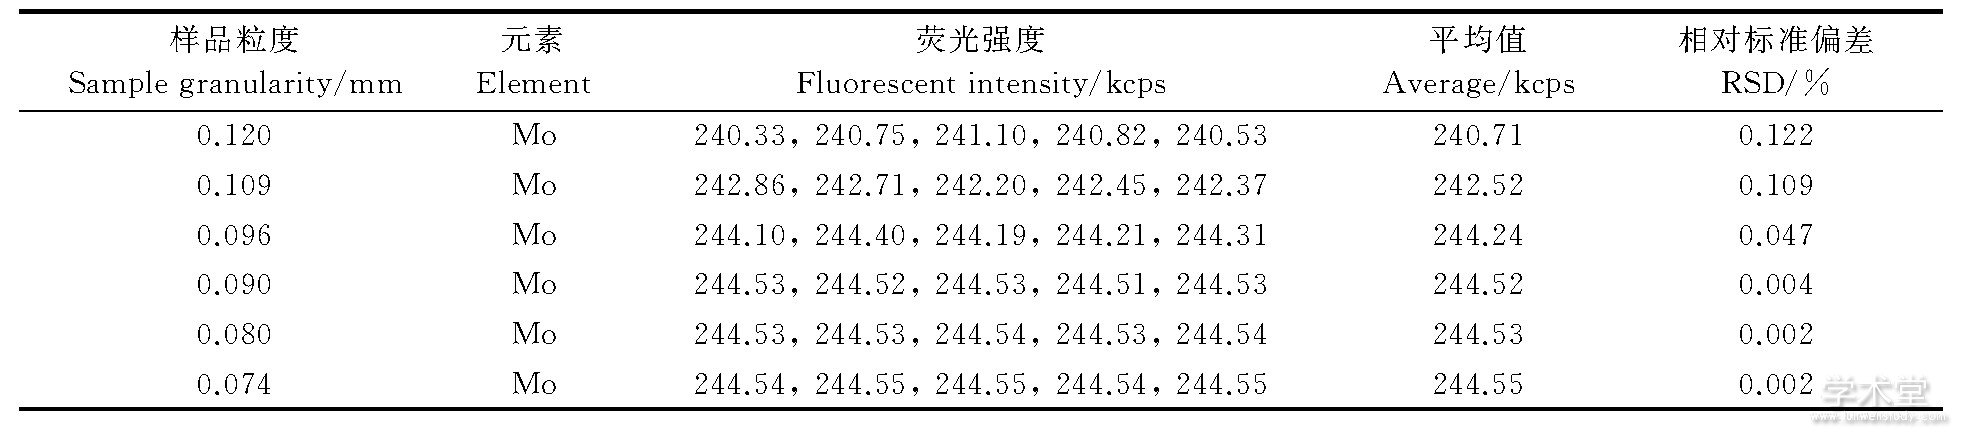 3 ͬƷӫǿTable 3 Fluorescent strength of samples at different granularity